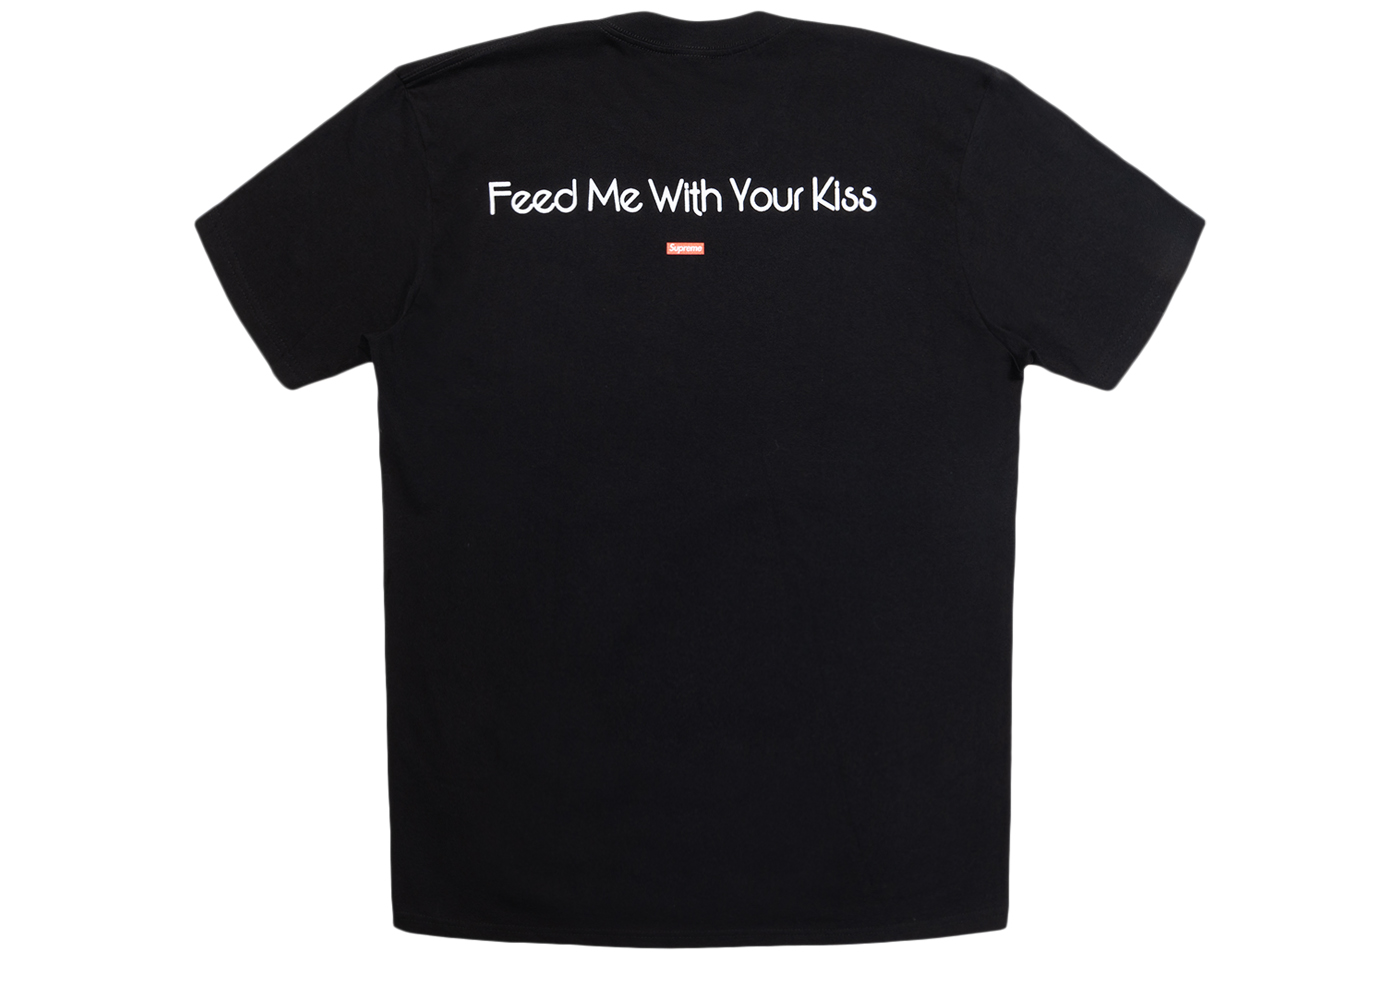 Supreme My Bloody Valentine Feed Me With Your Kiss Tee Black Men's